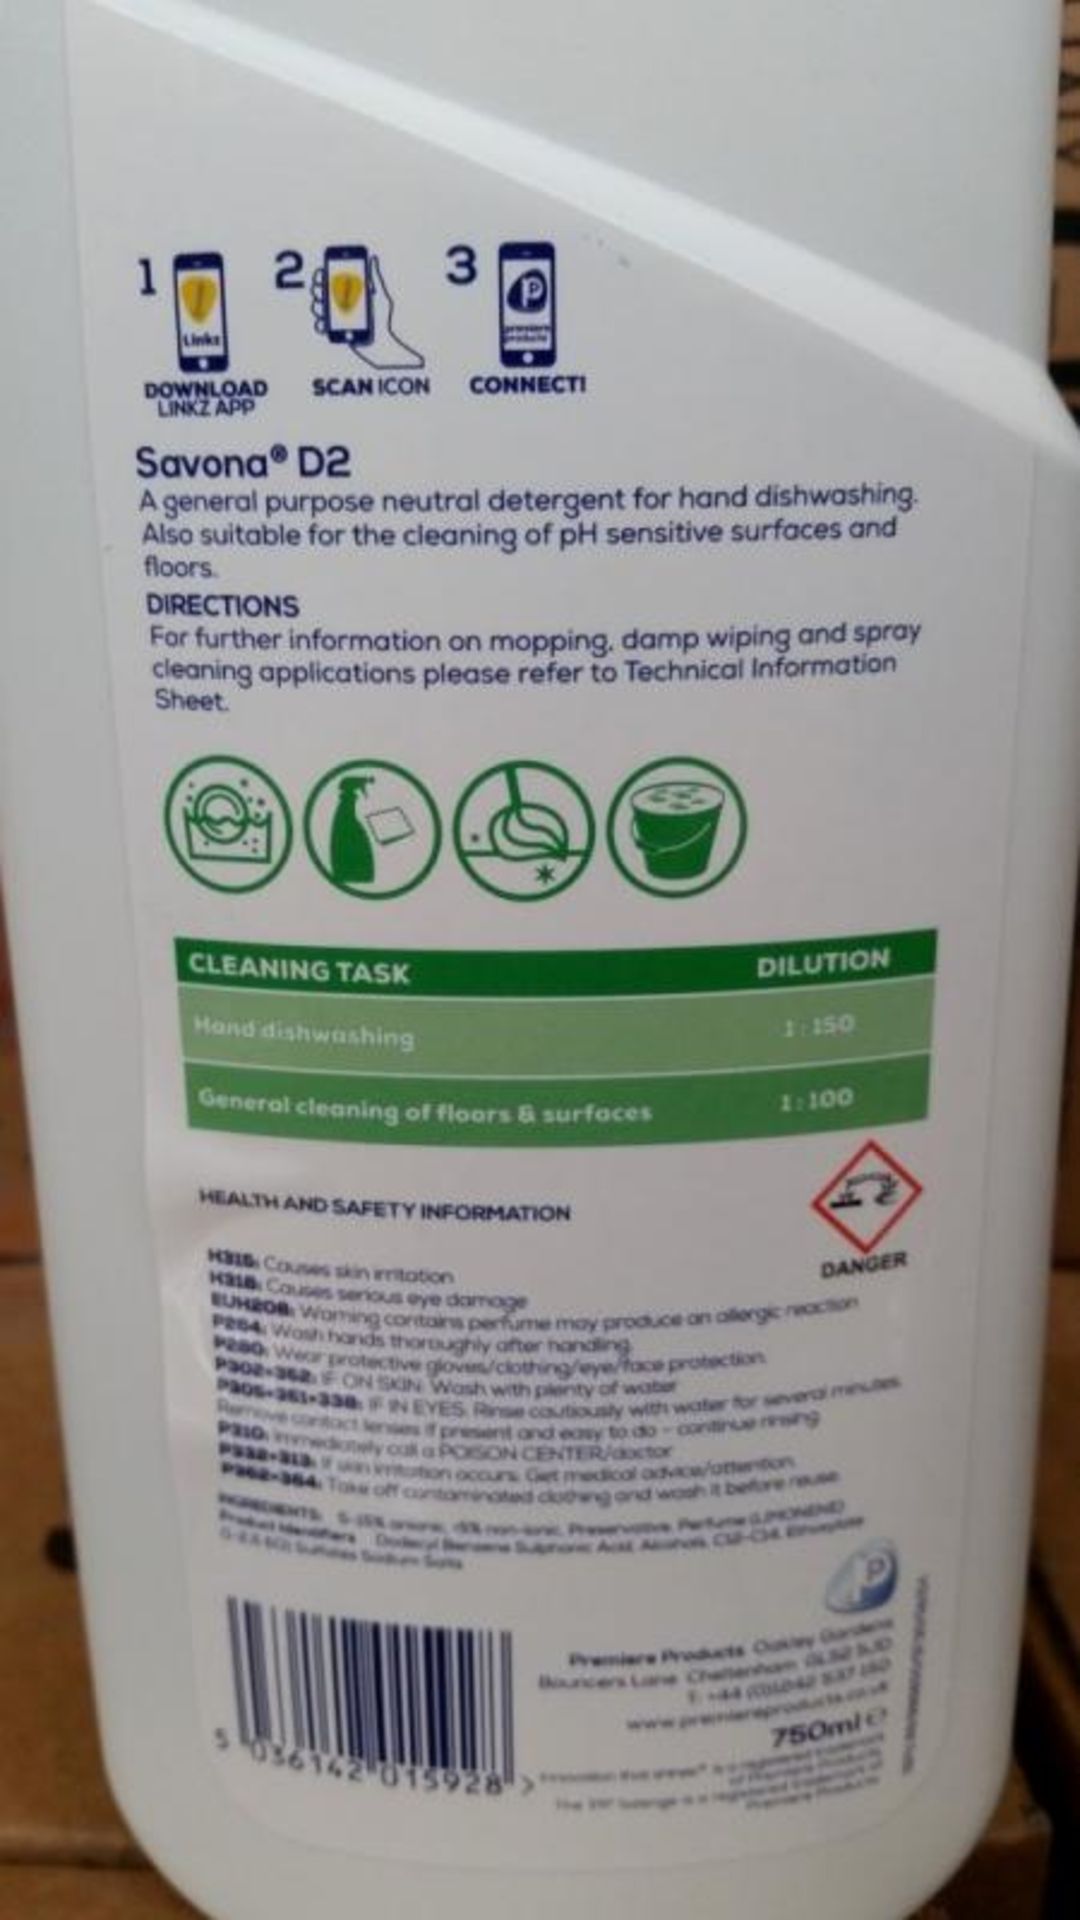 12 x Premiere Products 750ml Savona D2 Washing Up Liquid - For Squeaky Clean Crockery, Cutlery, Pots - Image 2 of 6